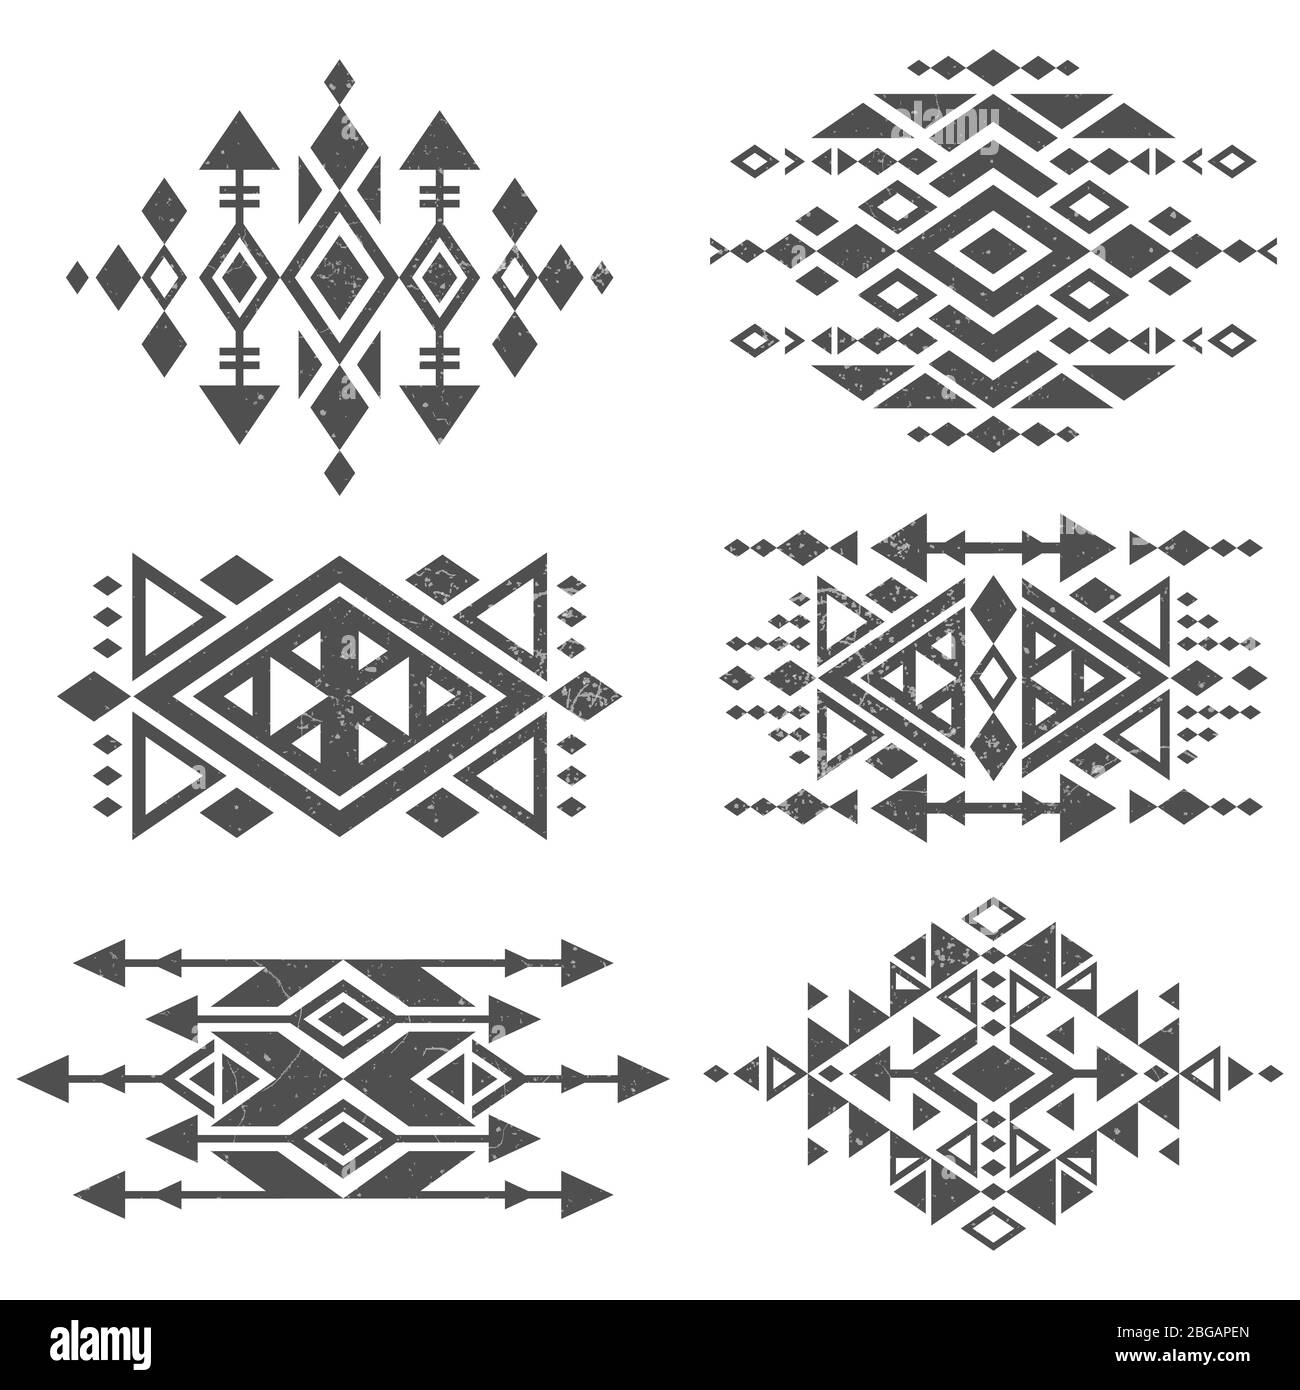 American indian sketch Stock Vector Images - Alamy